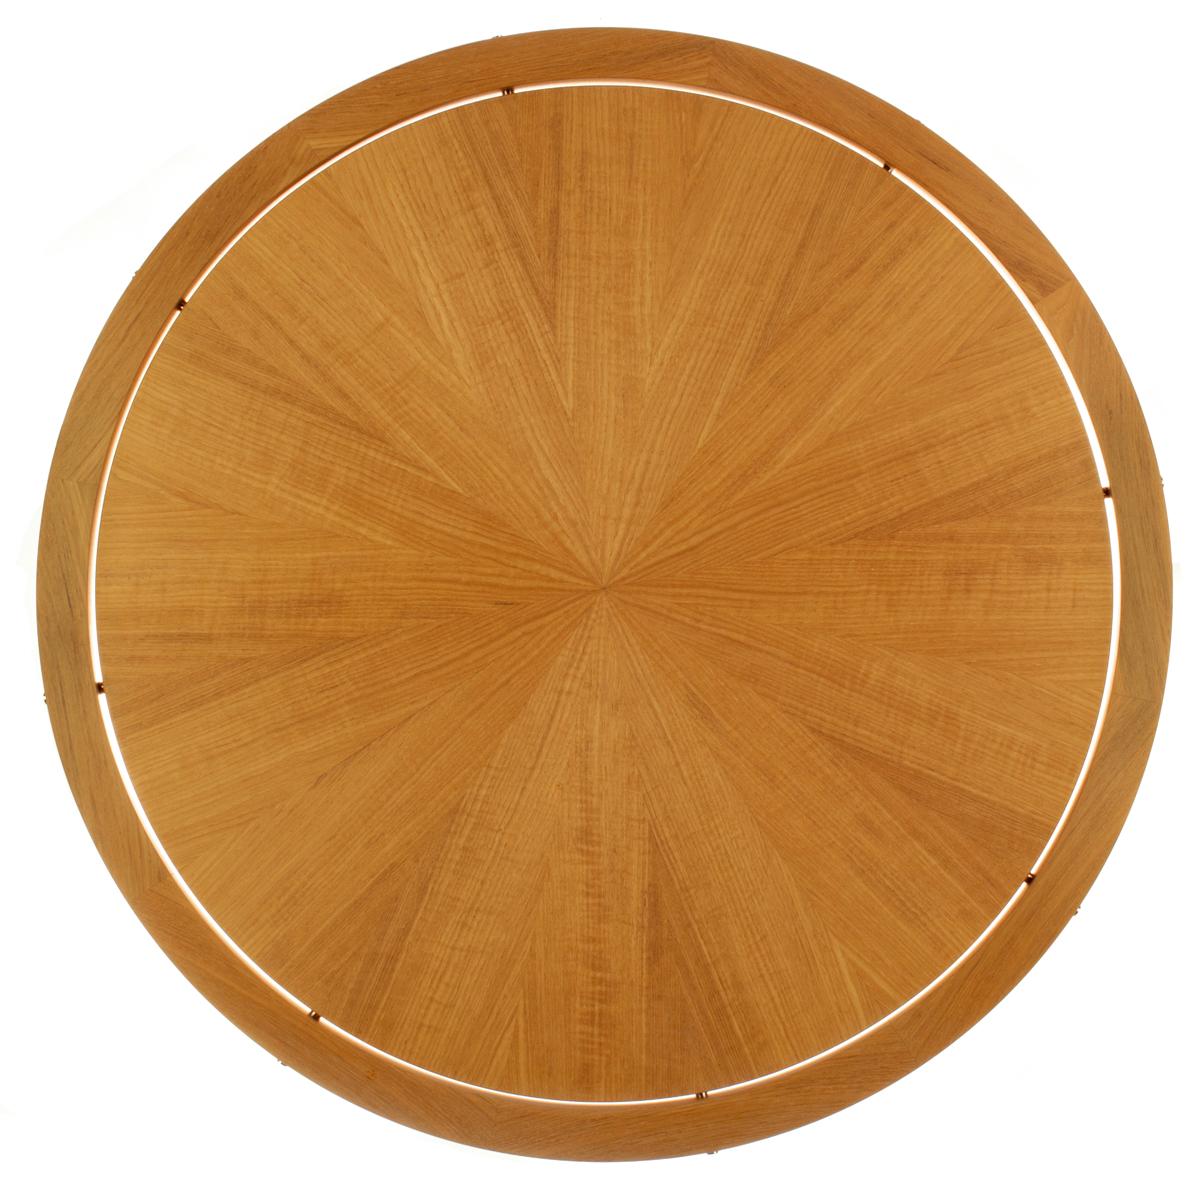 Designed to withstand the elements...beautifully. An exterior table handmade by Pollaro master craftsmen to exude timelessness, artistry, and function. Of hand-selected Burmese teak from a single board (or sequential boards) and hand cut, integrated